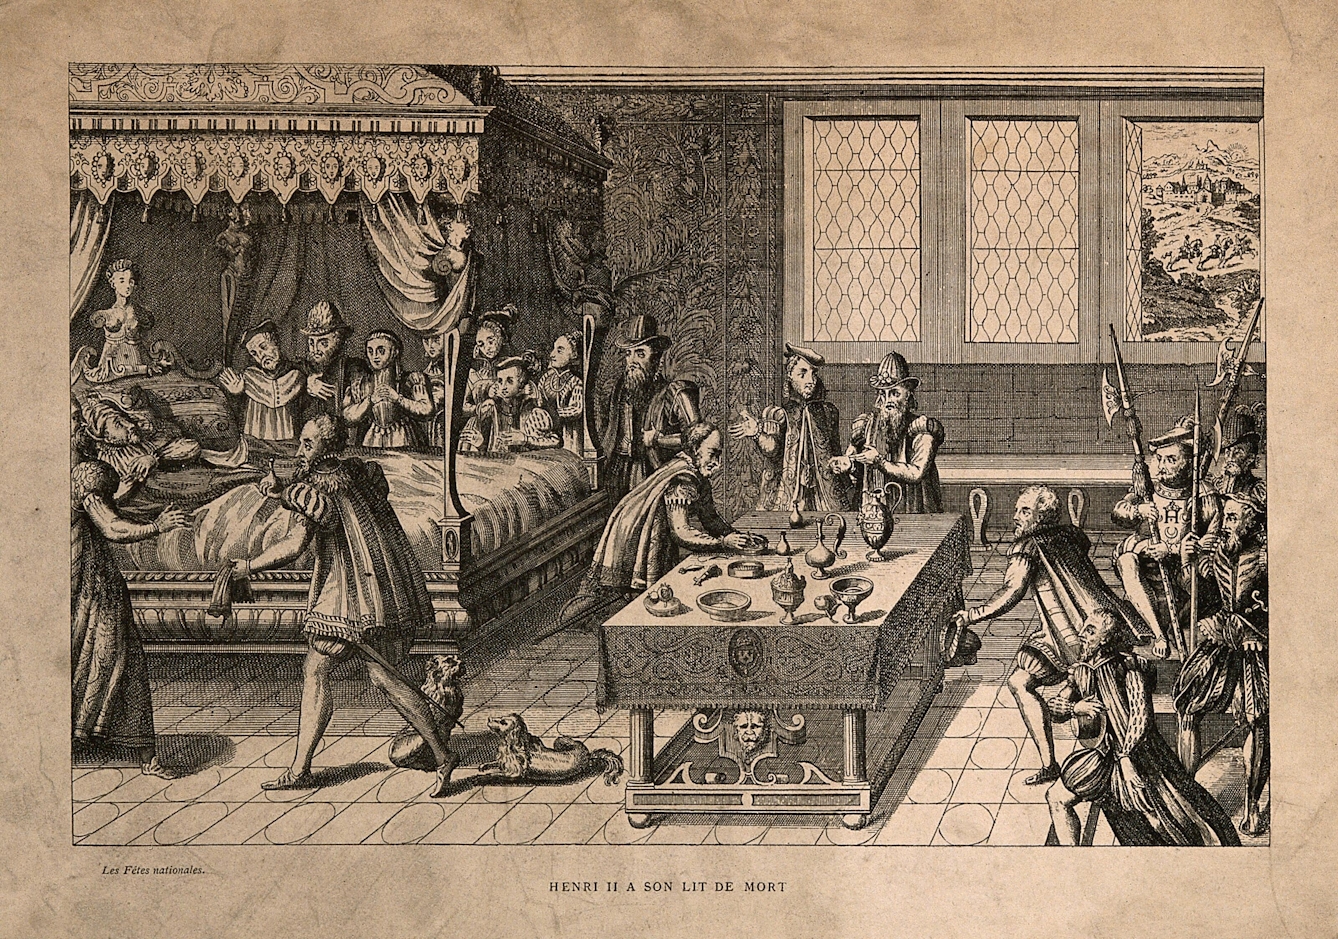 Process print of King Henry II of France on his deathbed. Members of the royal family and royal household are in attendance. The king 's arm rests across his body, as he looks to his right towards a member of the royal household. 